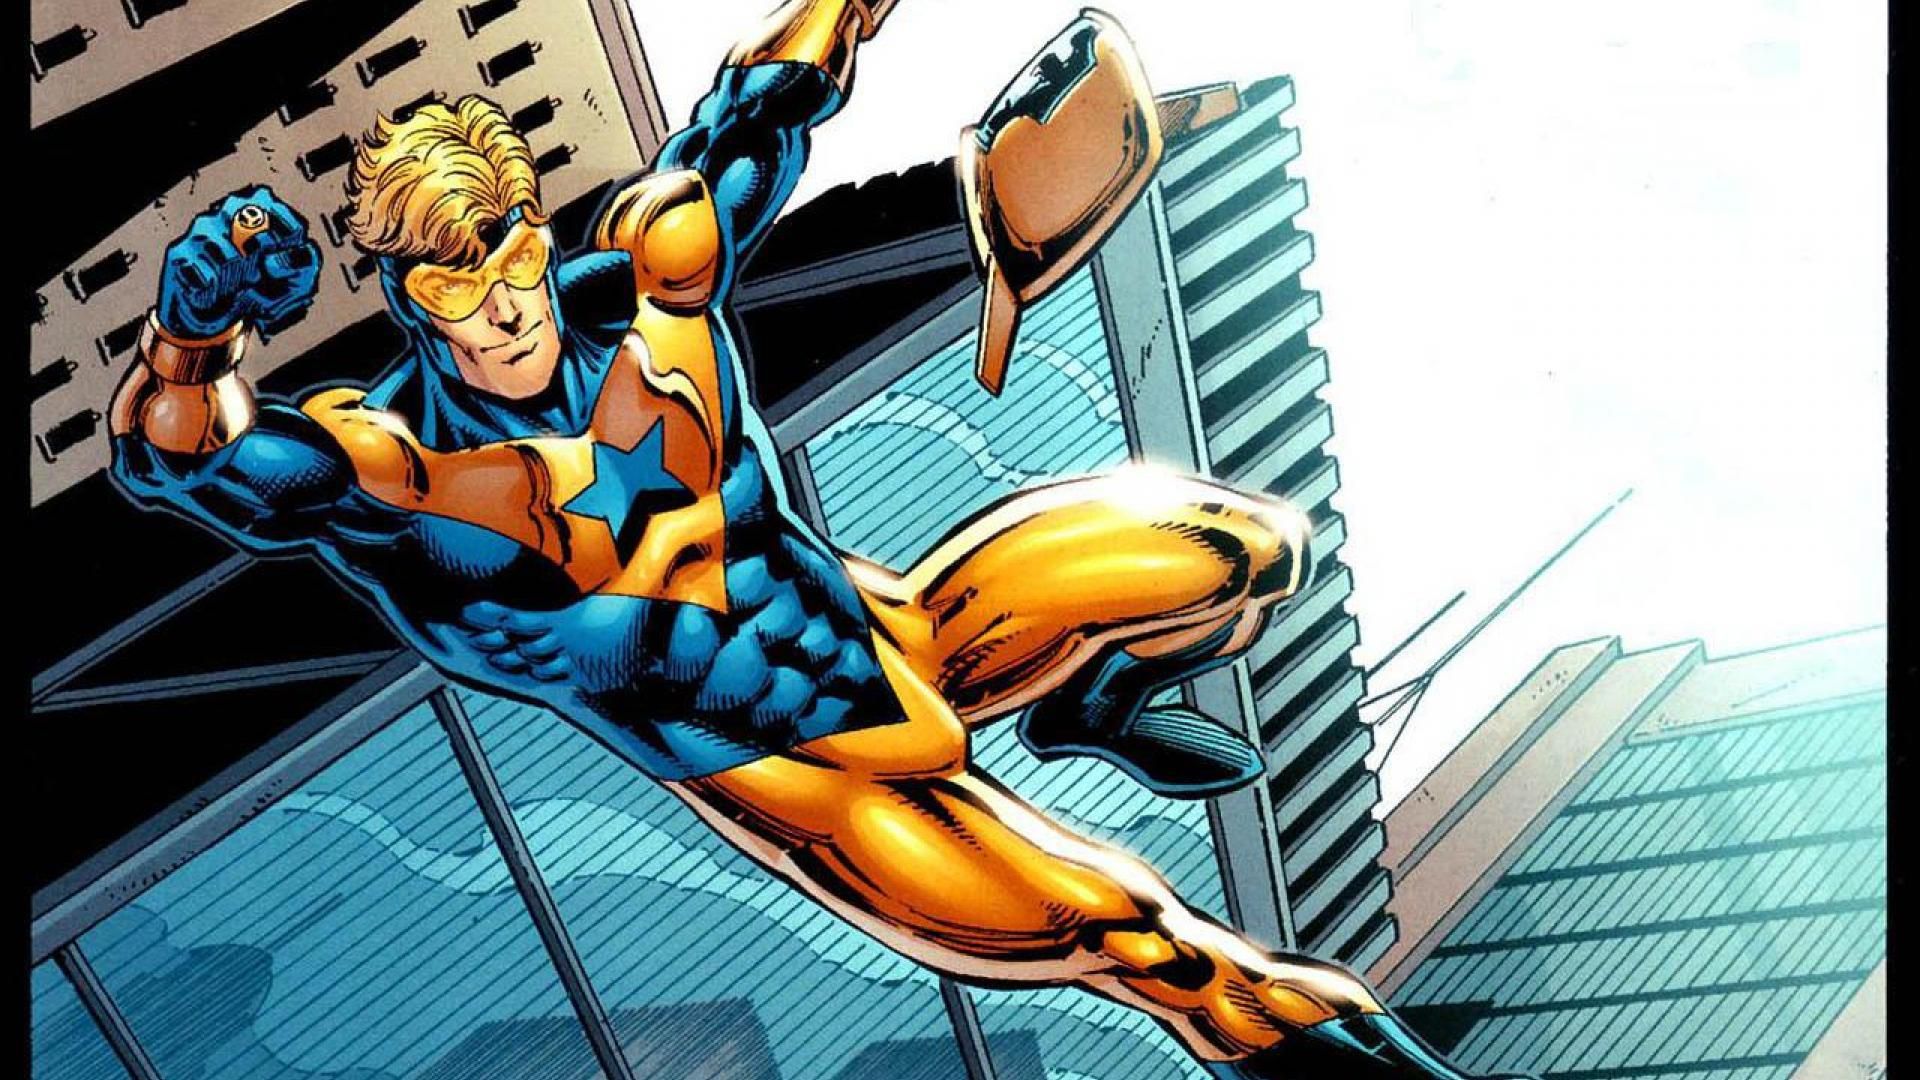 DC's Booster Gold movie still in the works, apparently